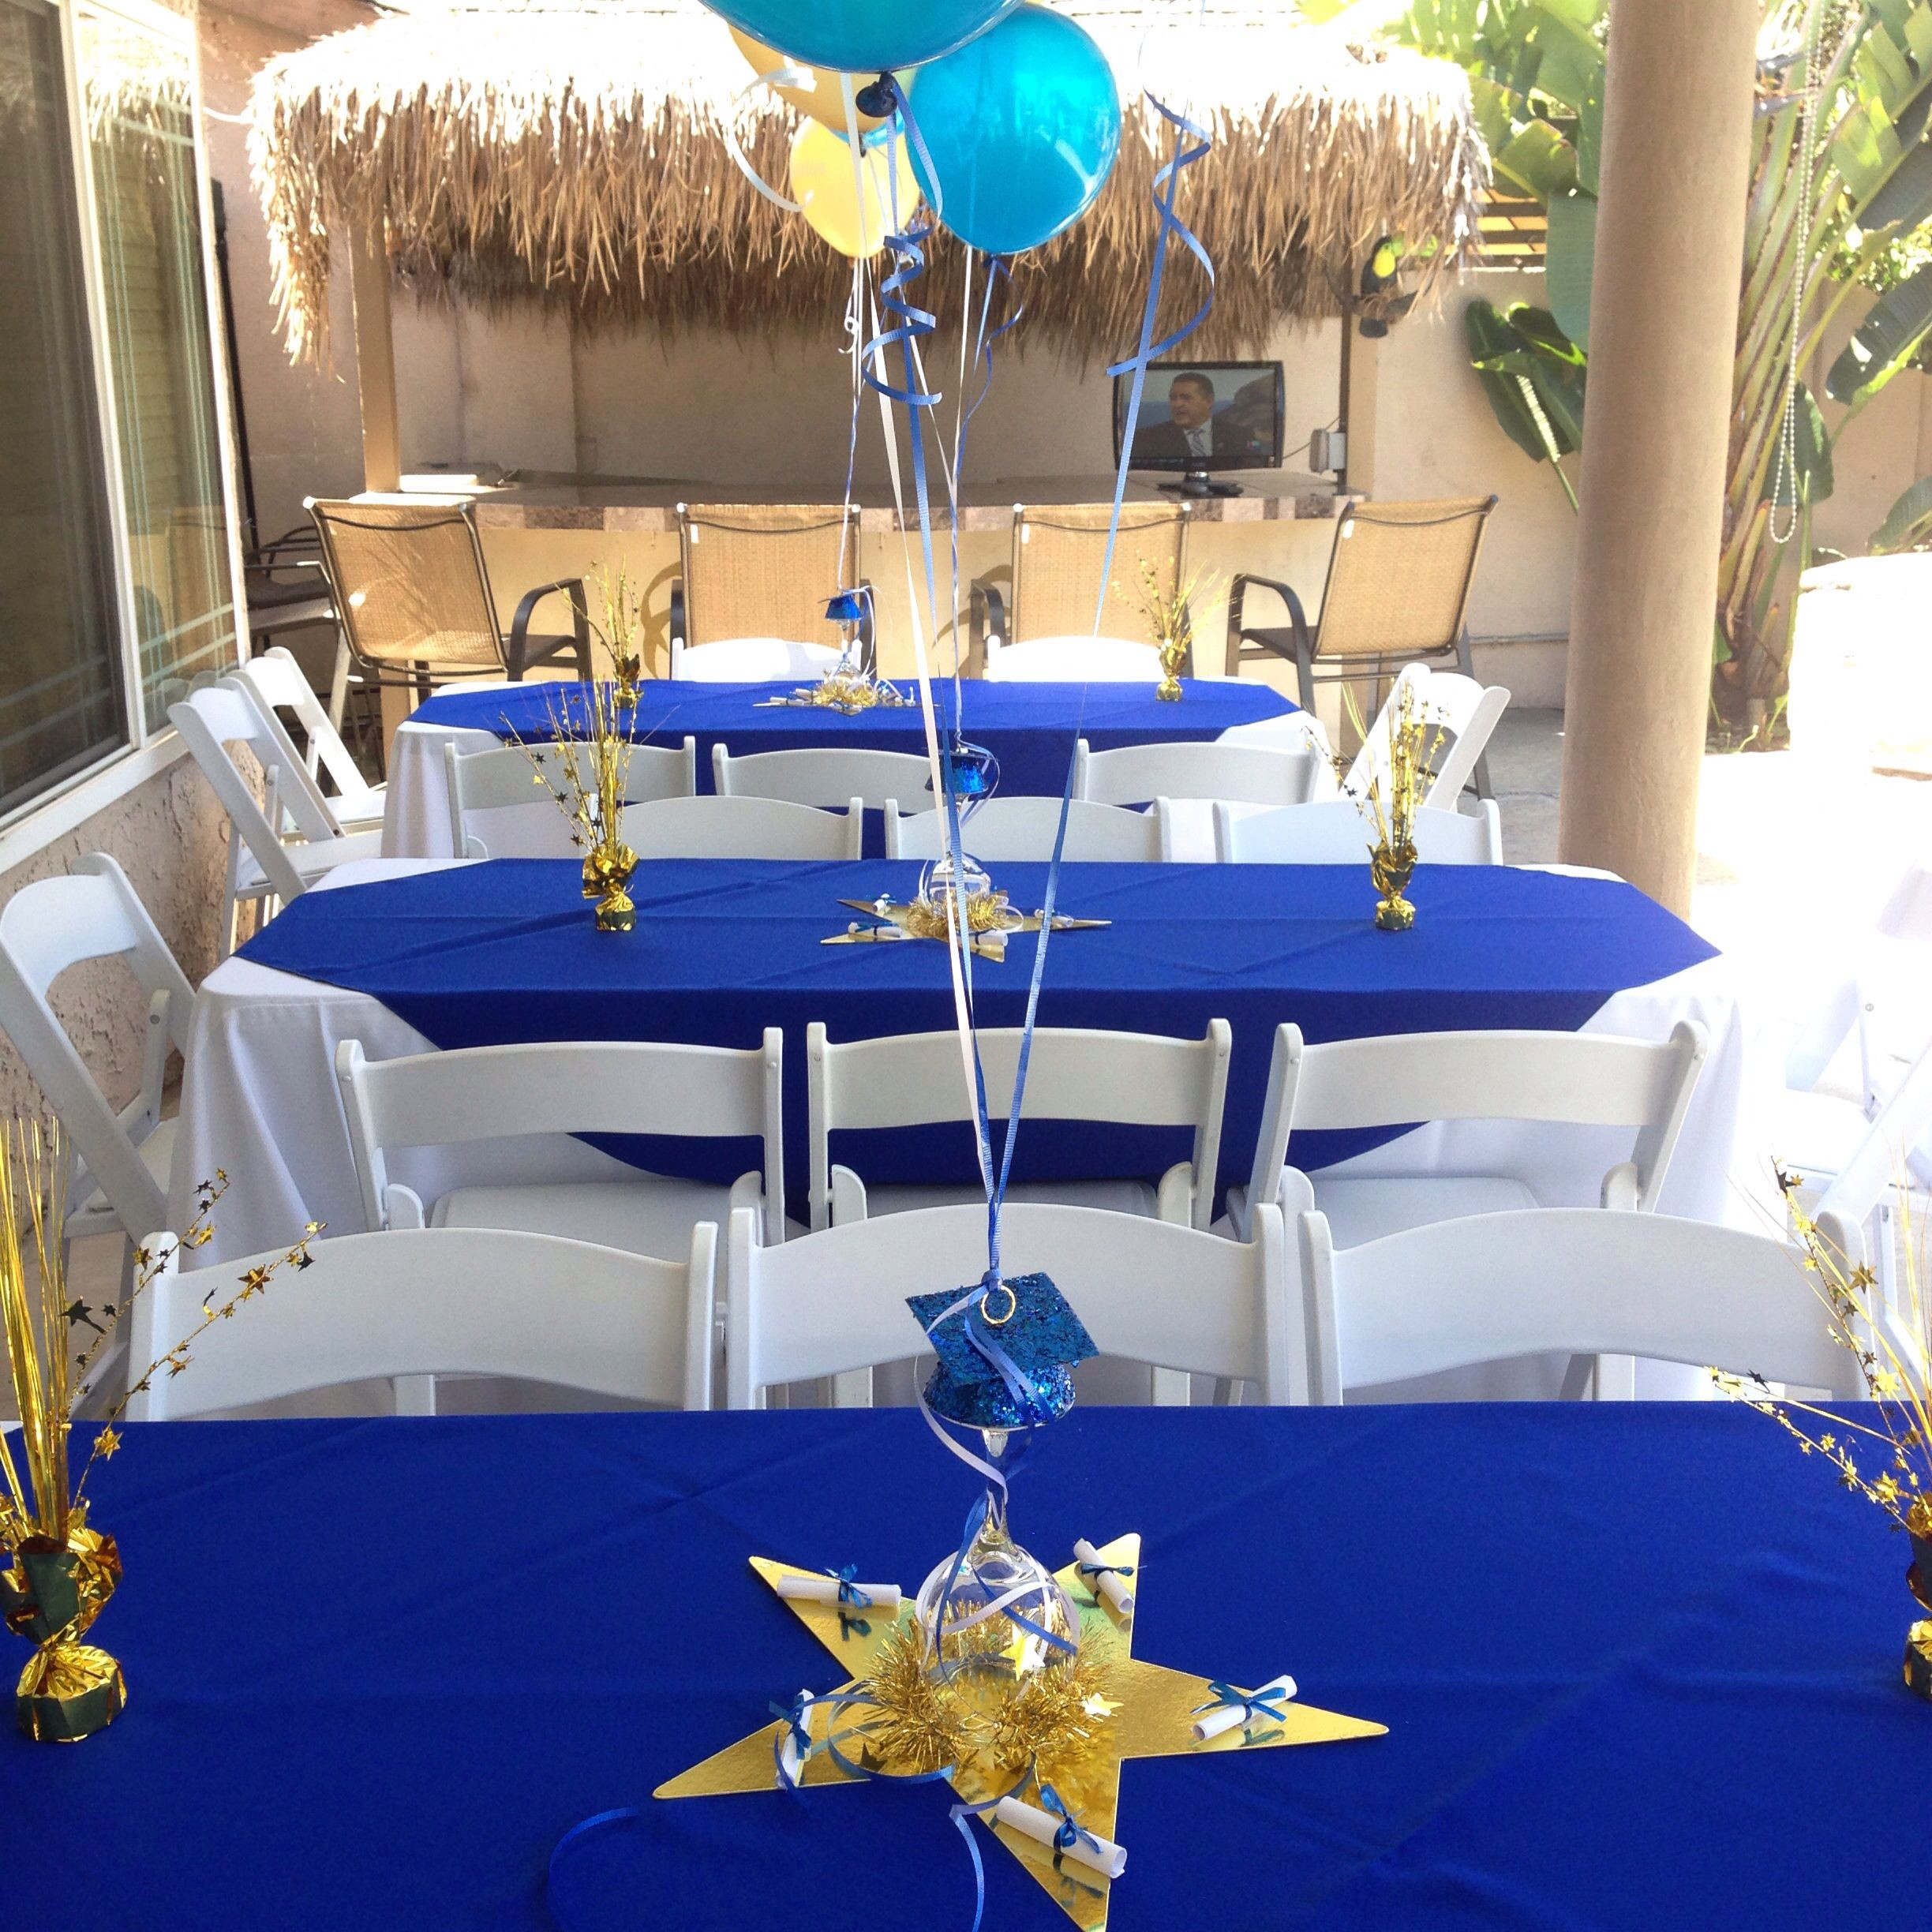 The Best Outdoor Graduation Party Ideas for Guys Home, Family, Style